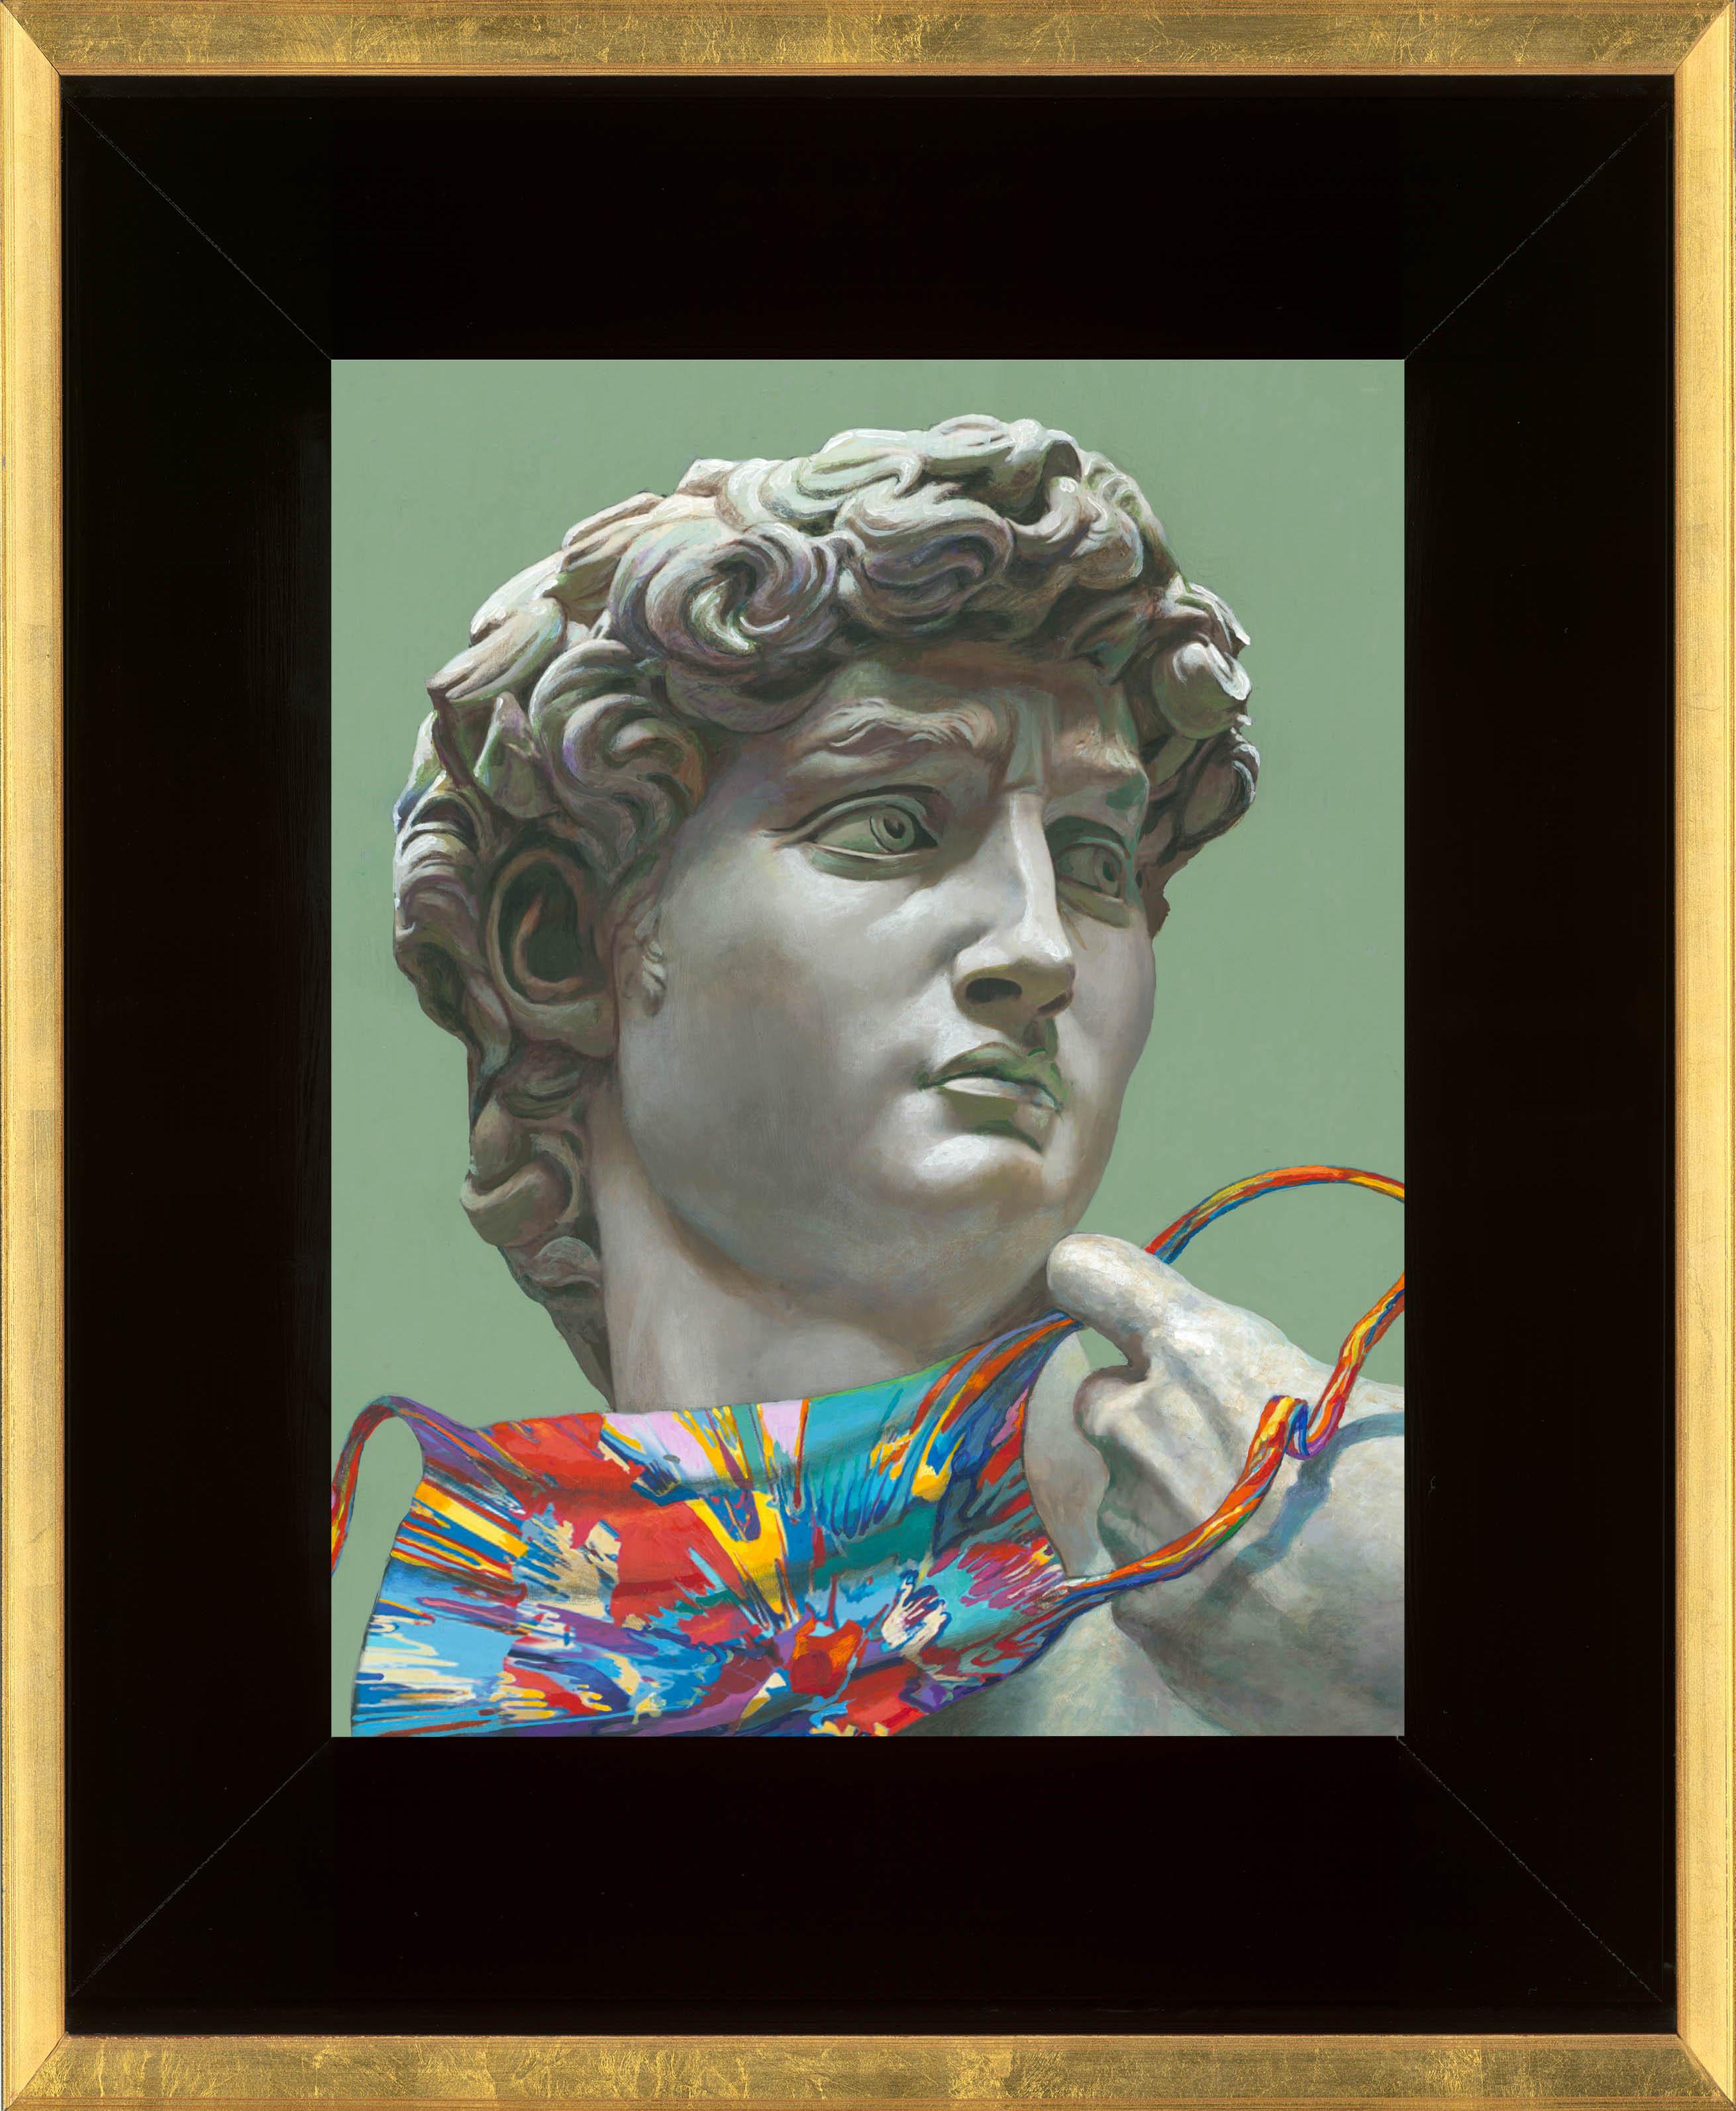 Michelangelo “David” with Damien Hirst’s mask & Unmasked - Painting by Clement Kamena